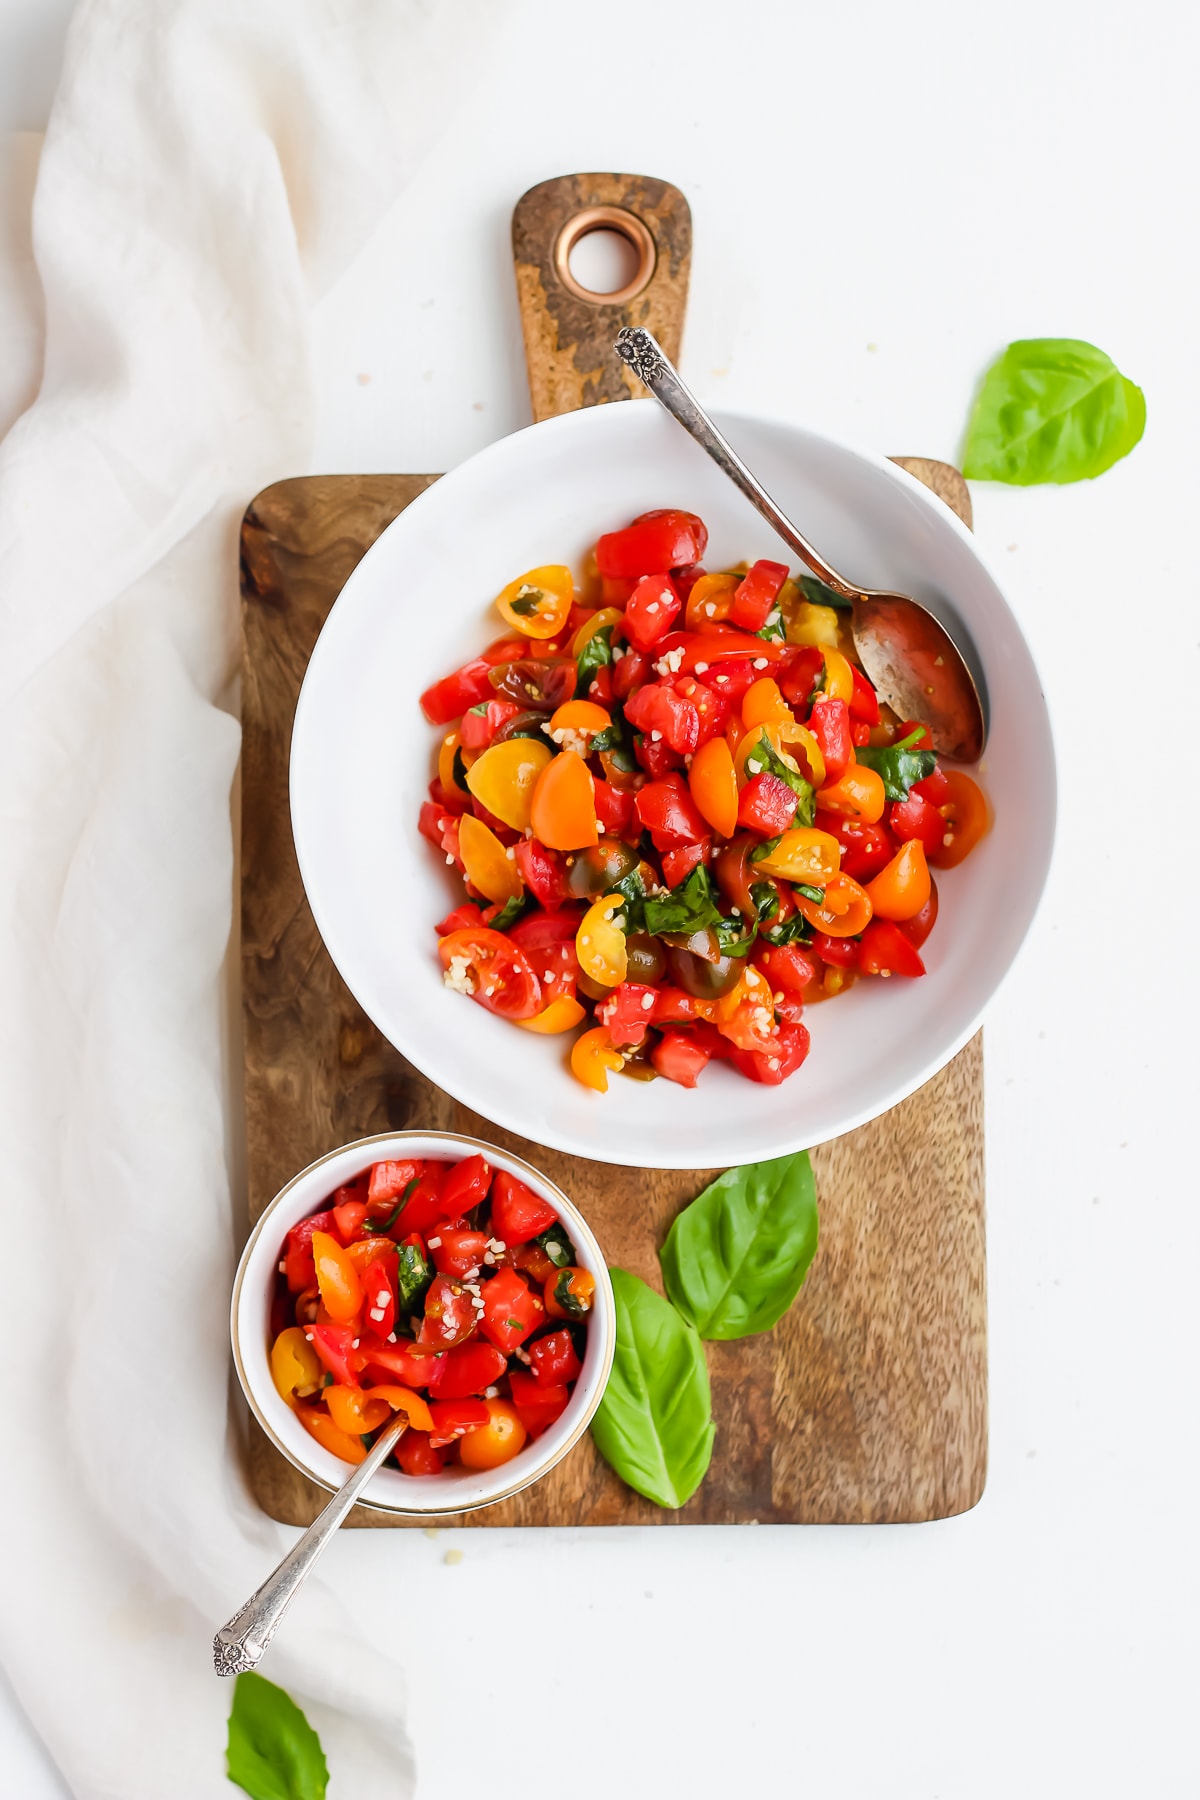 Chopped cherry tomatoes and roma tomatoes in a bowl combined with garlic, olive oil, and basil.